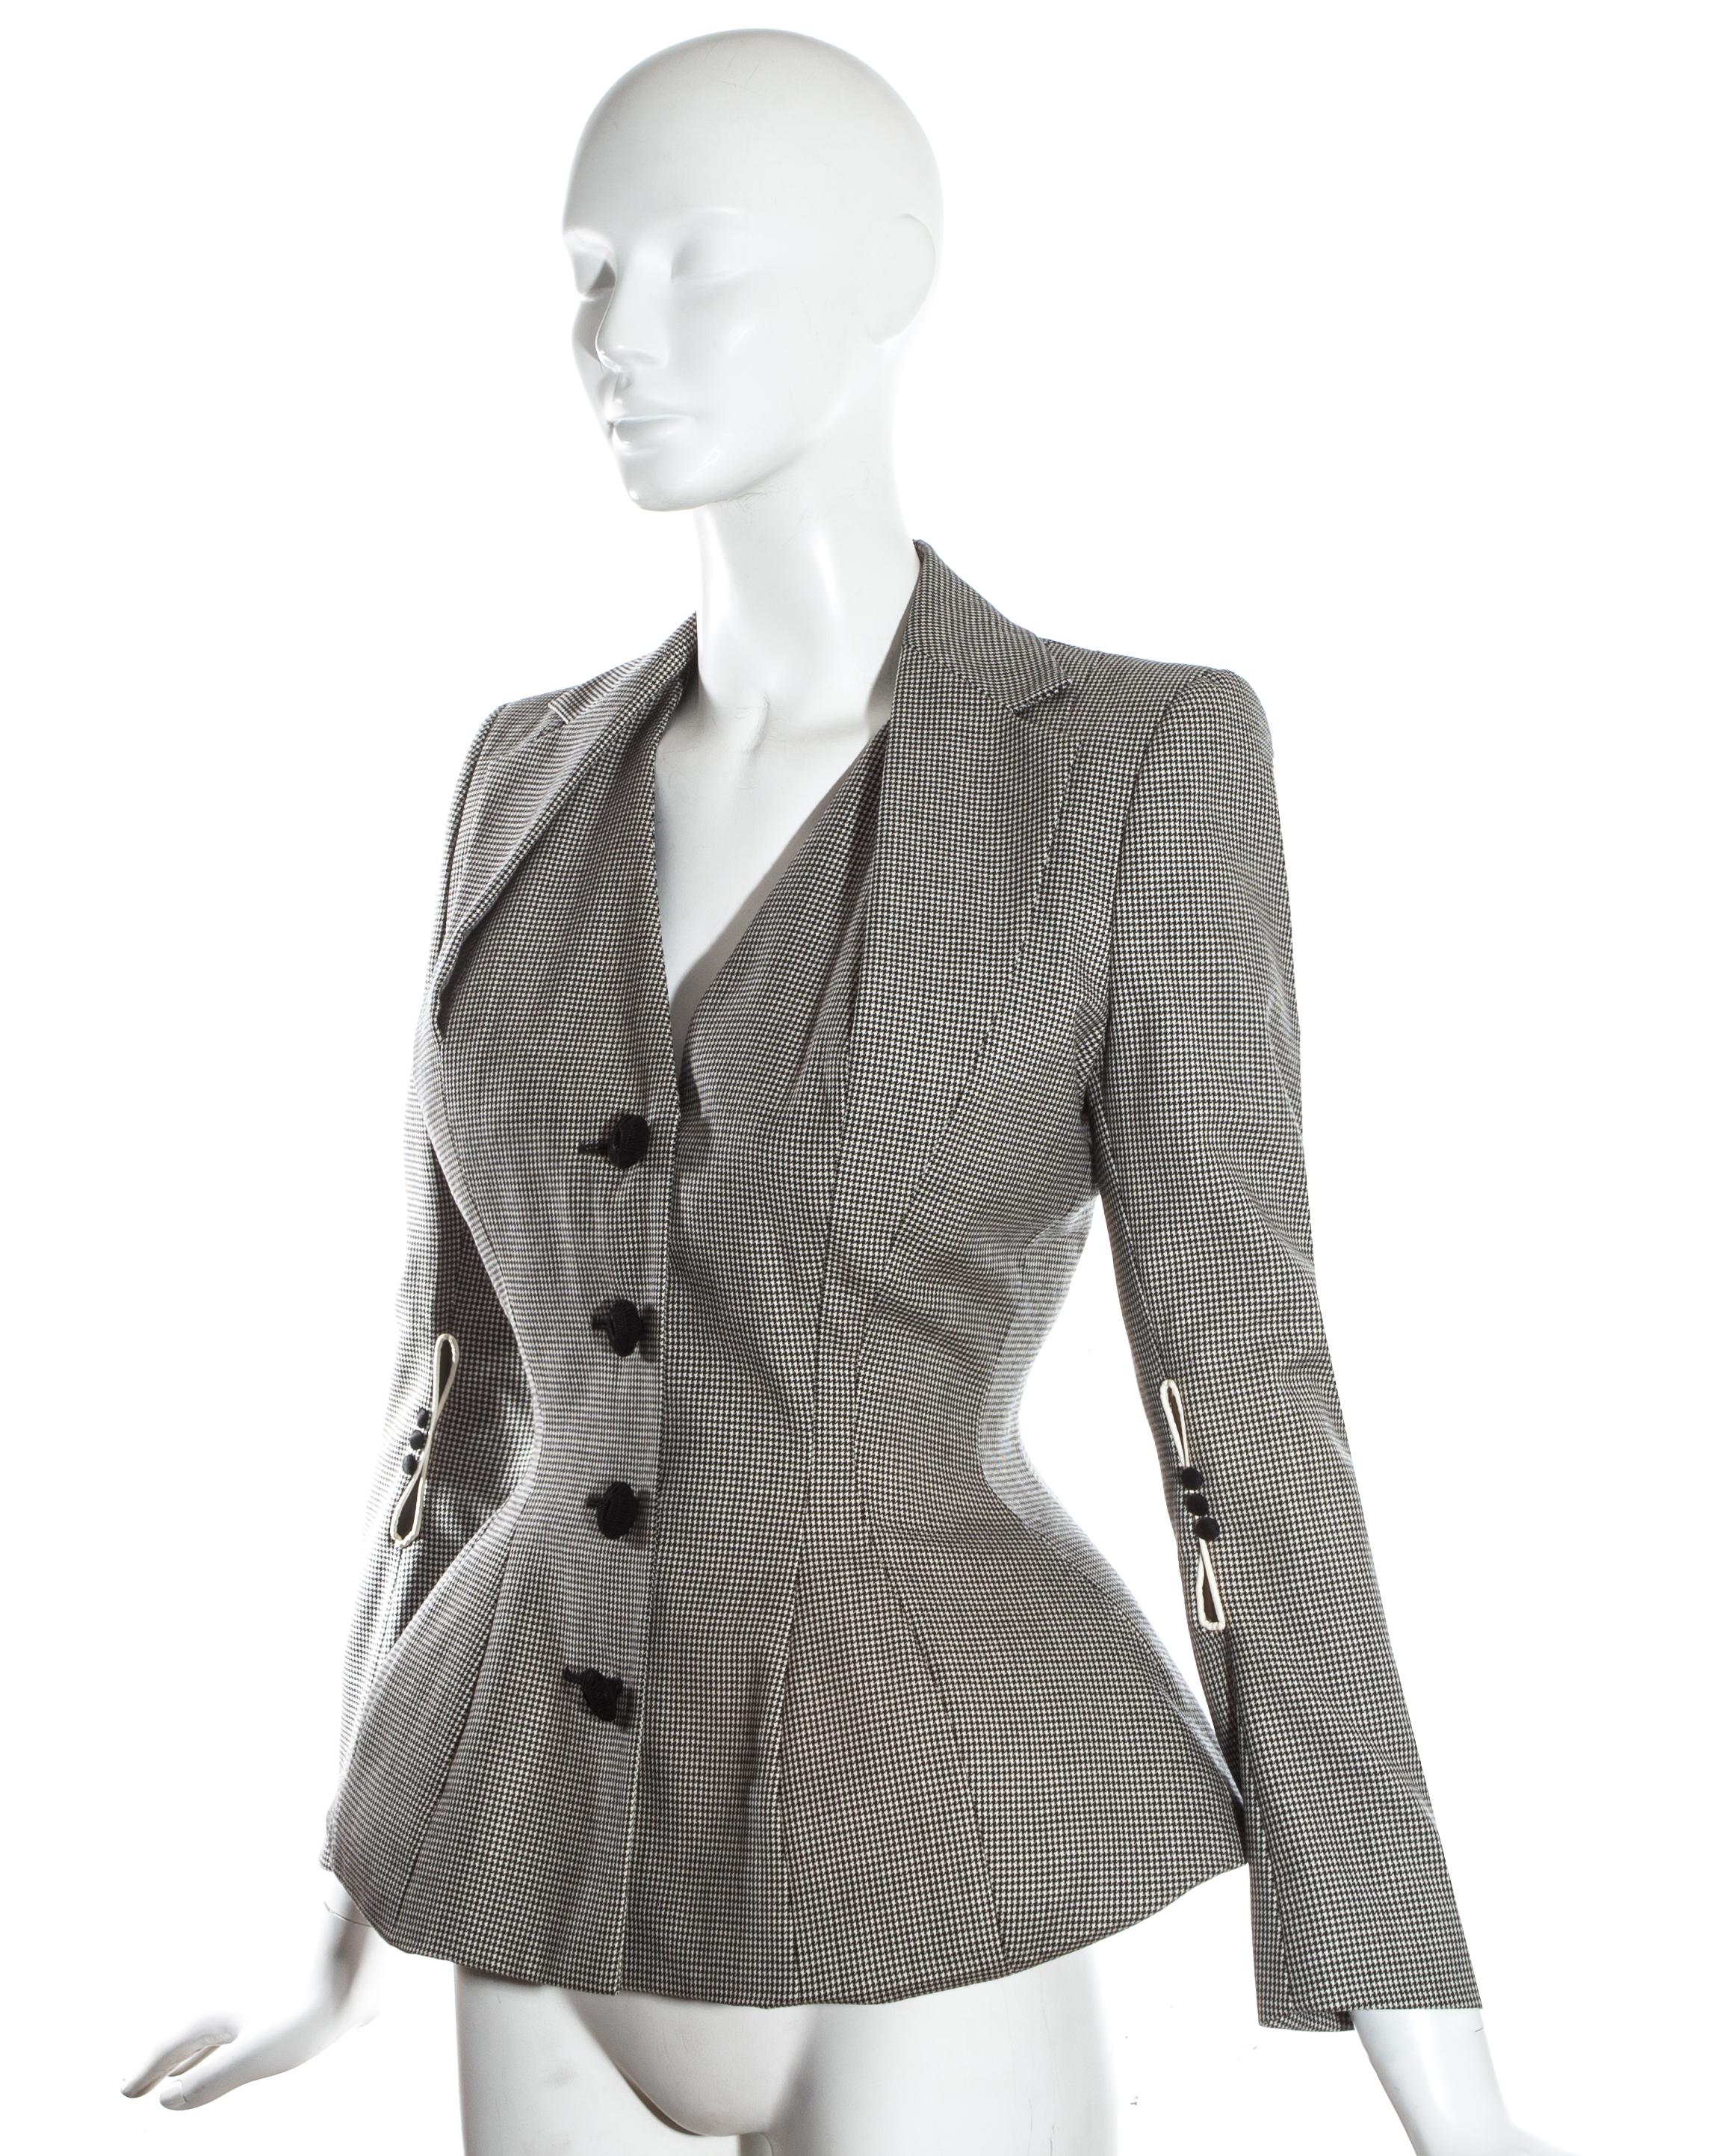 Women's John Galliano hound's tooth check wool jacket with padded hips, ss 1995